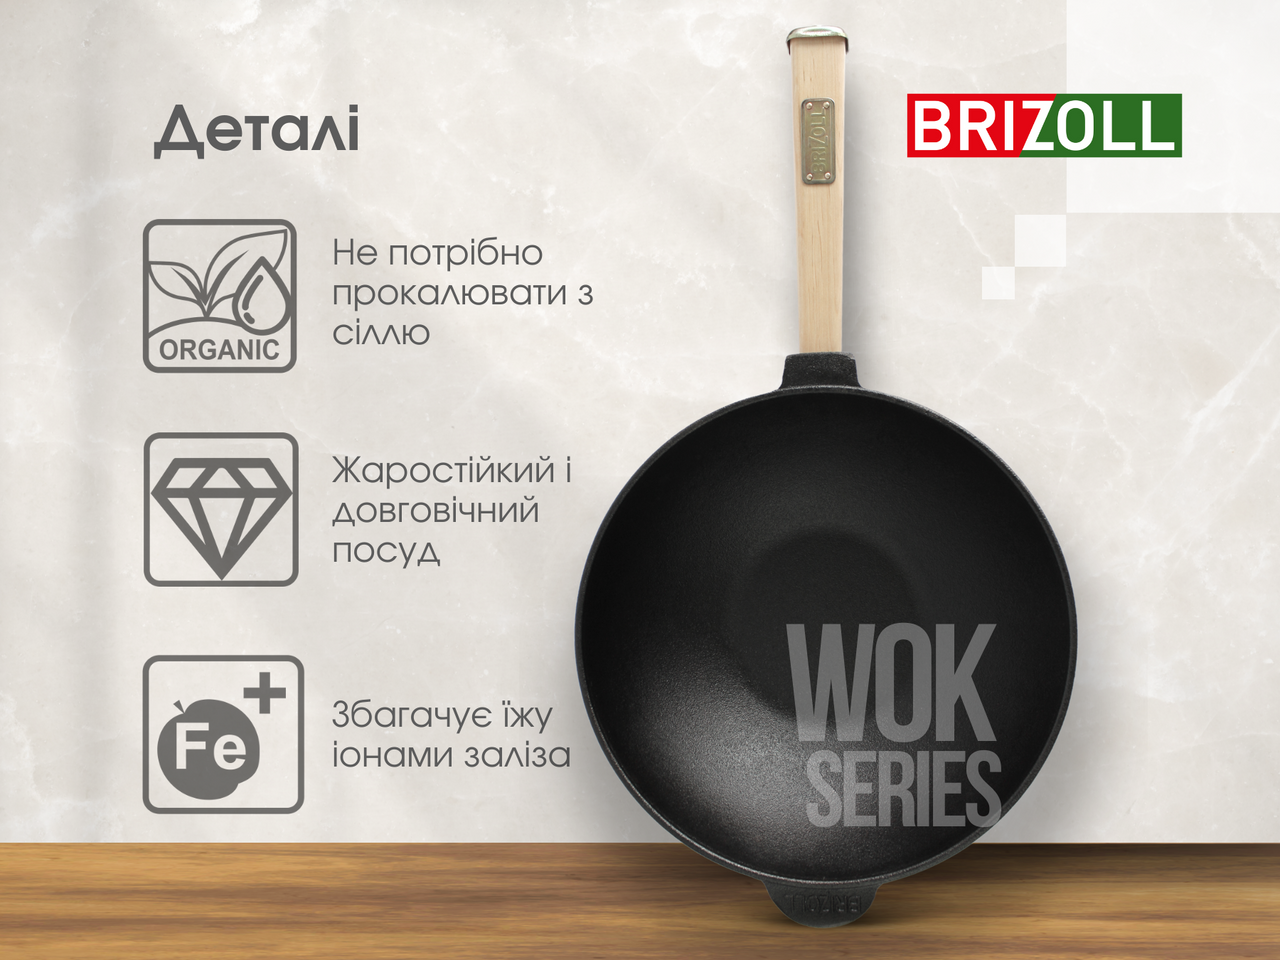 Cast iron WOK pan 2,8 l with wooden handle and cast irons lid